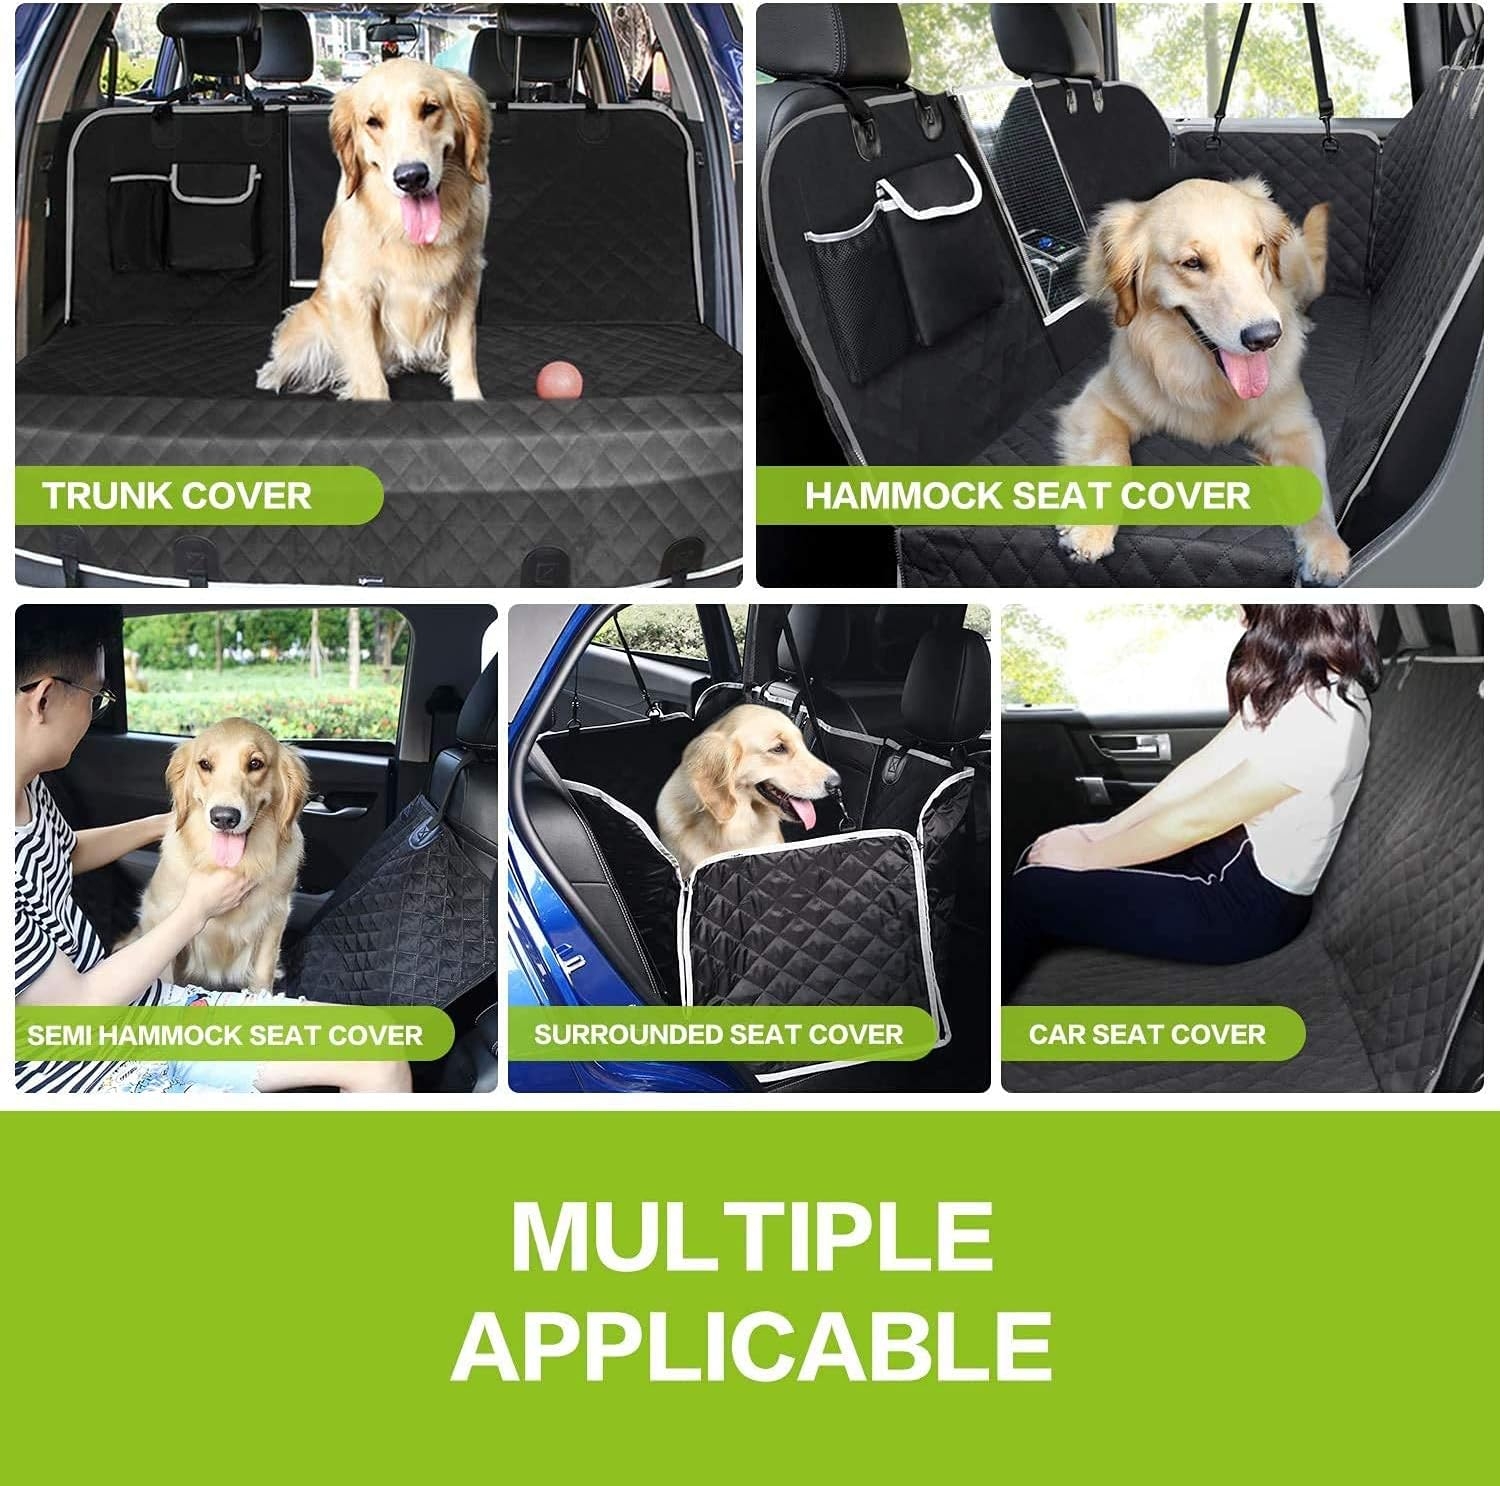 Pecute Dog Seat Cover 100% Waterproof Car Seat Covers for Pets Back Seat Cover with Mesh Window, Scratch Proof Non Slip Dog Car Hammock, Dog Backseat Cover for Cars Trucks SUV